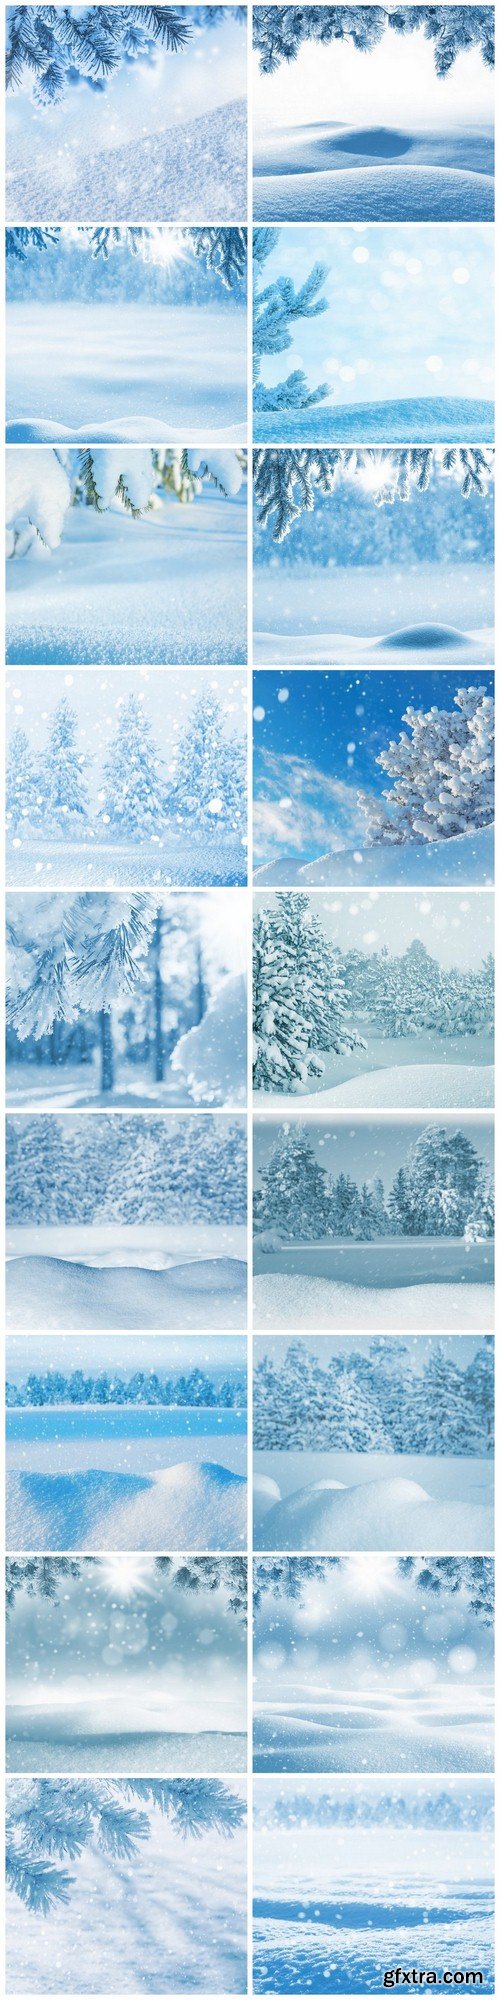 Frost - 18 UHQ JPEG Stock Images